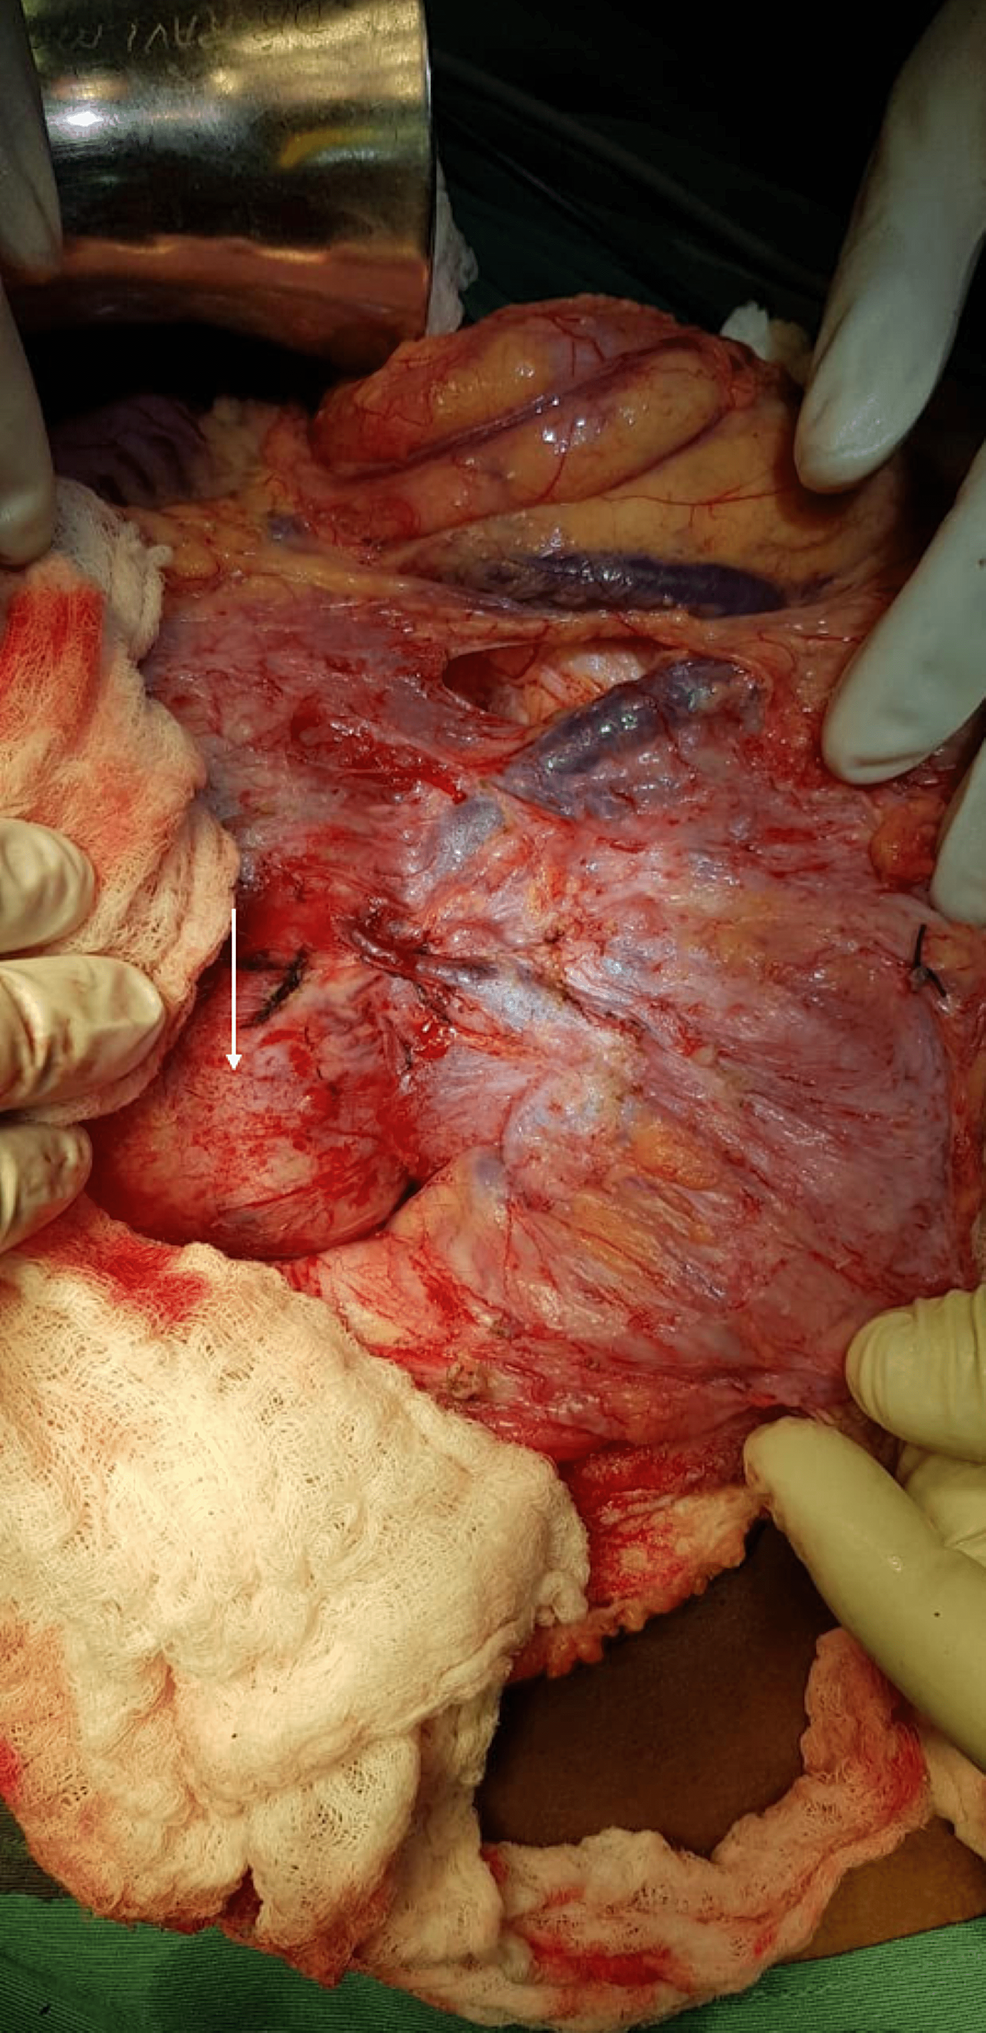 Demonstration-of-engorged-mesocolic-veins-and-impression-of-the-retroperitoneal-mass-(white-arrow).